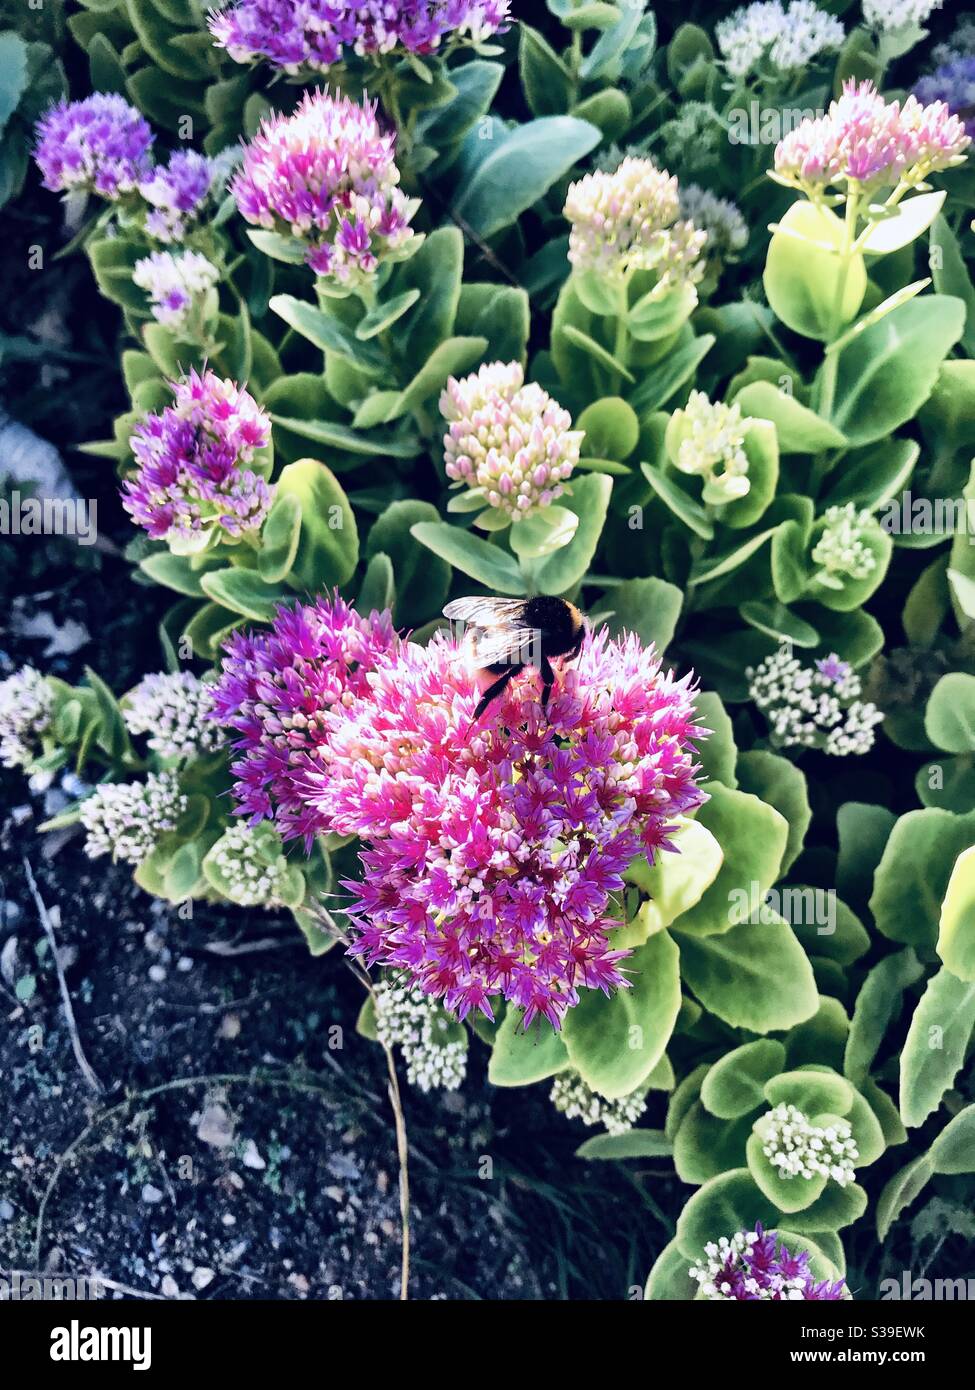 Bumble bee on flowers Stock Photo